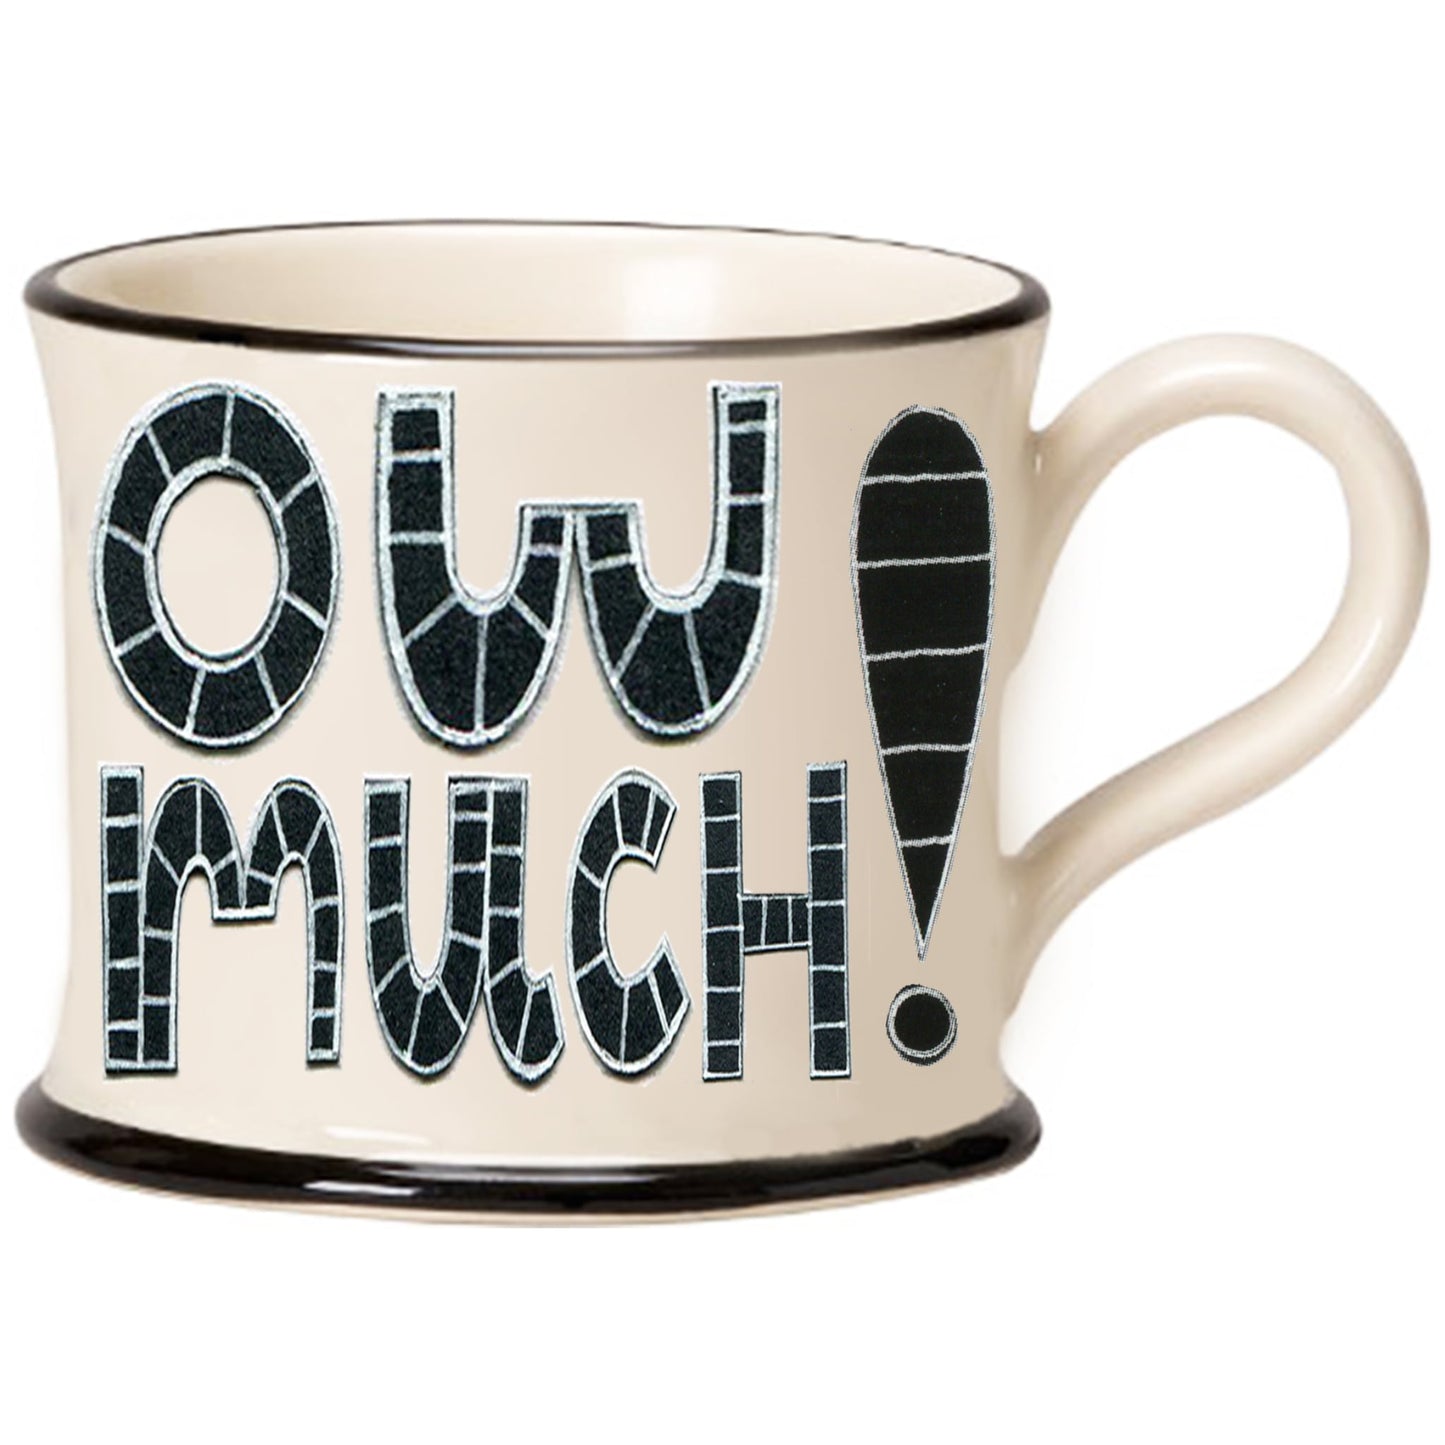 Ow Much! Mug - The Great Yorkshire Shop